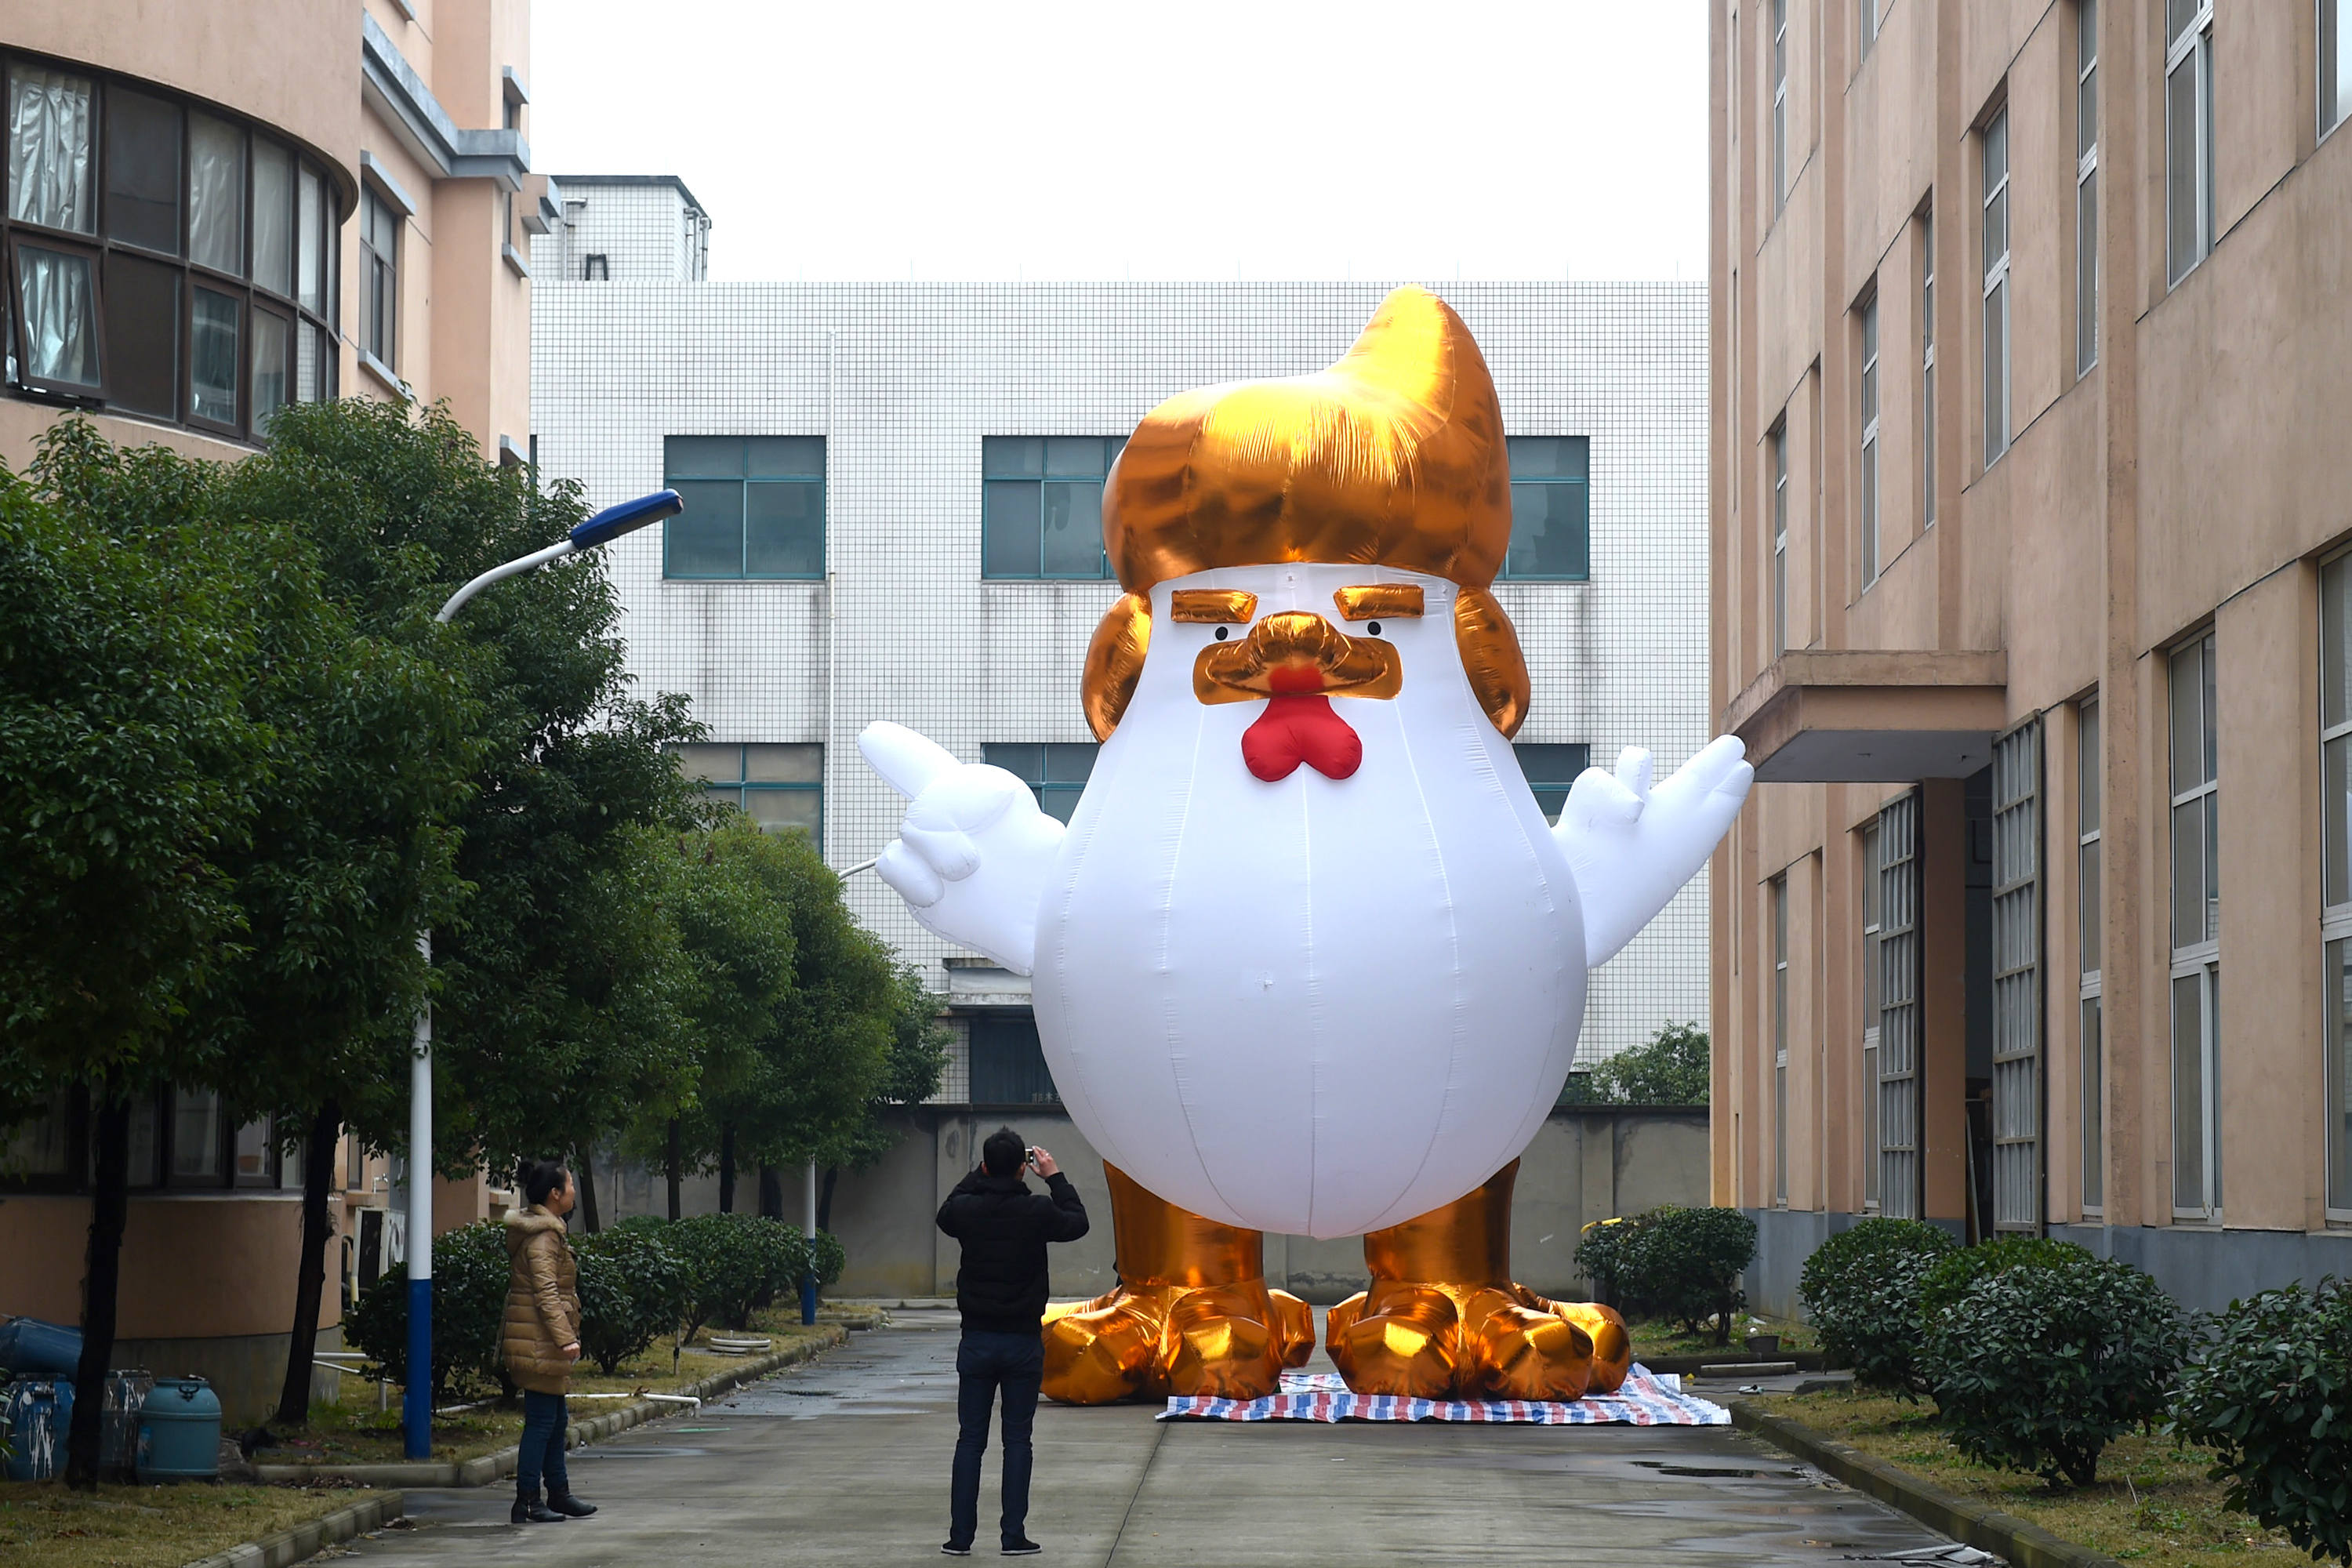 A company in China makes giant chicken inflatables that resemble Donald Trump.